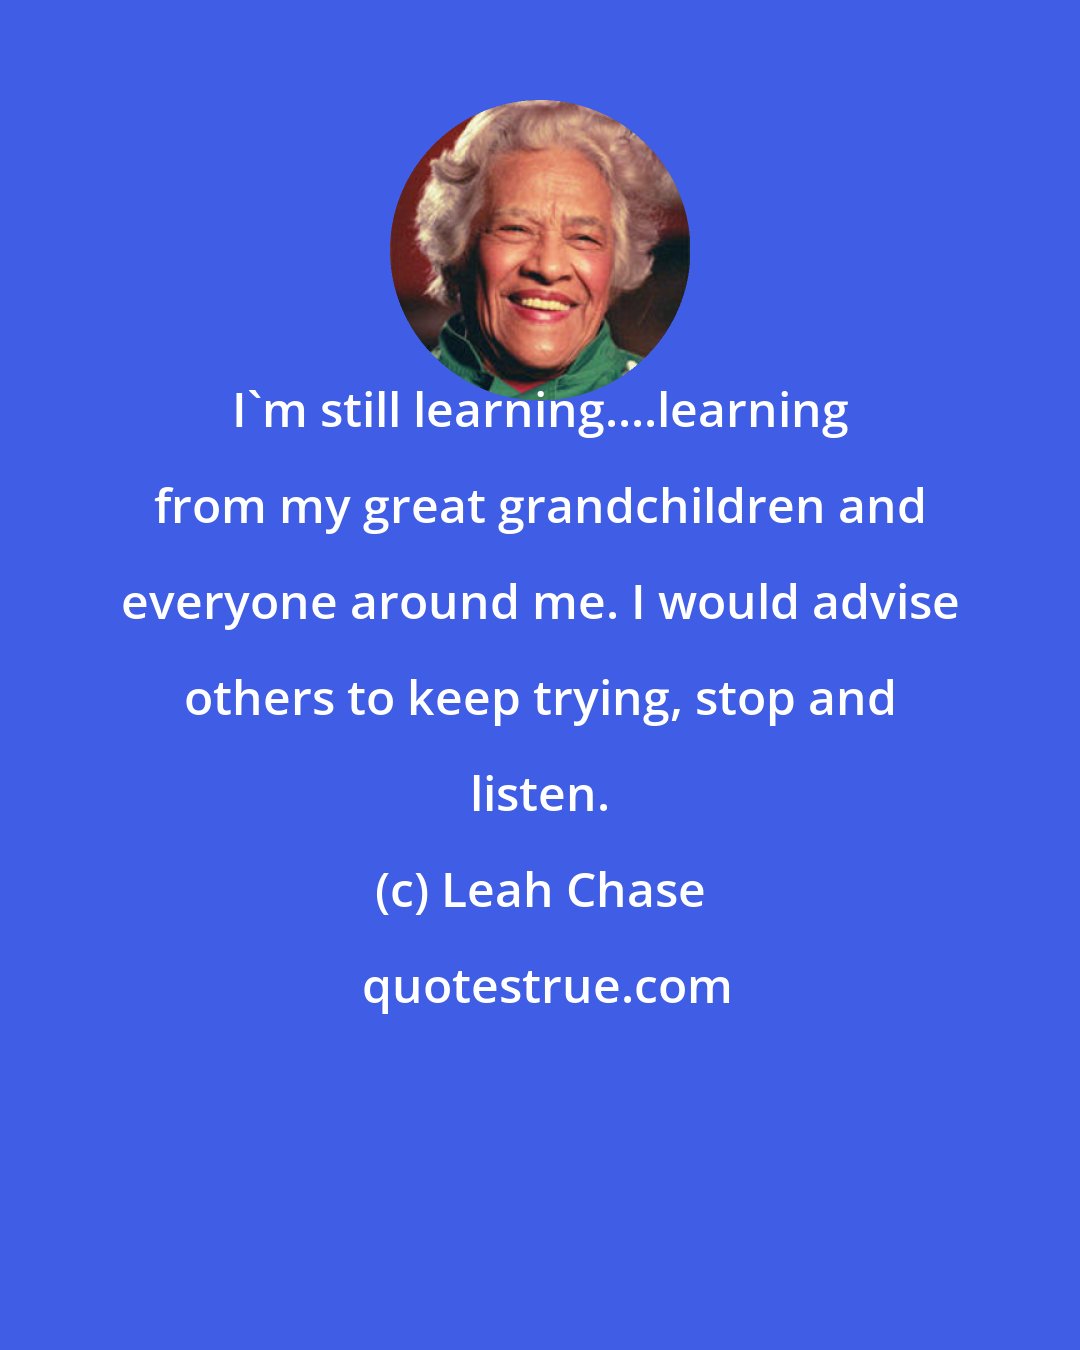 Leah Chase: I'm still learning....learning from my great grandchildren and everyone around me. I would advise others to keep trying, stop and listen.